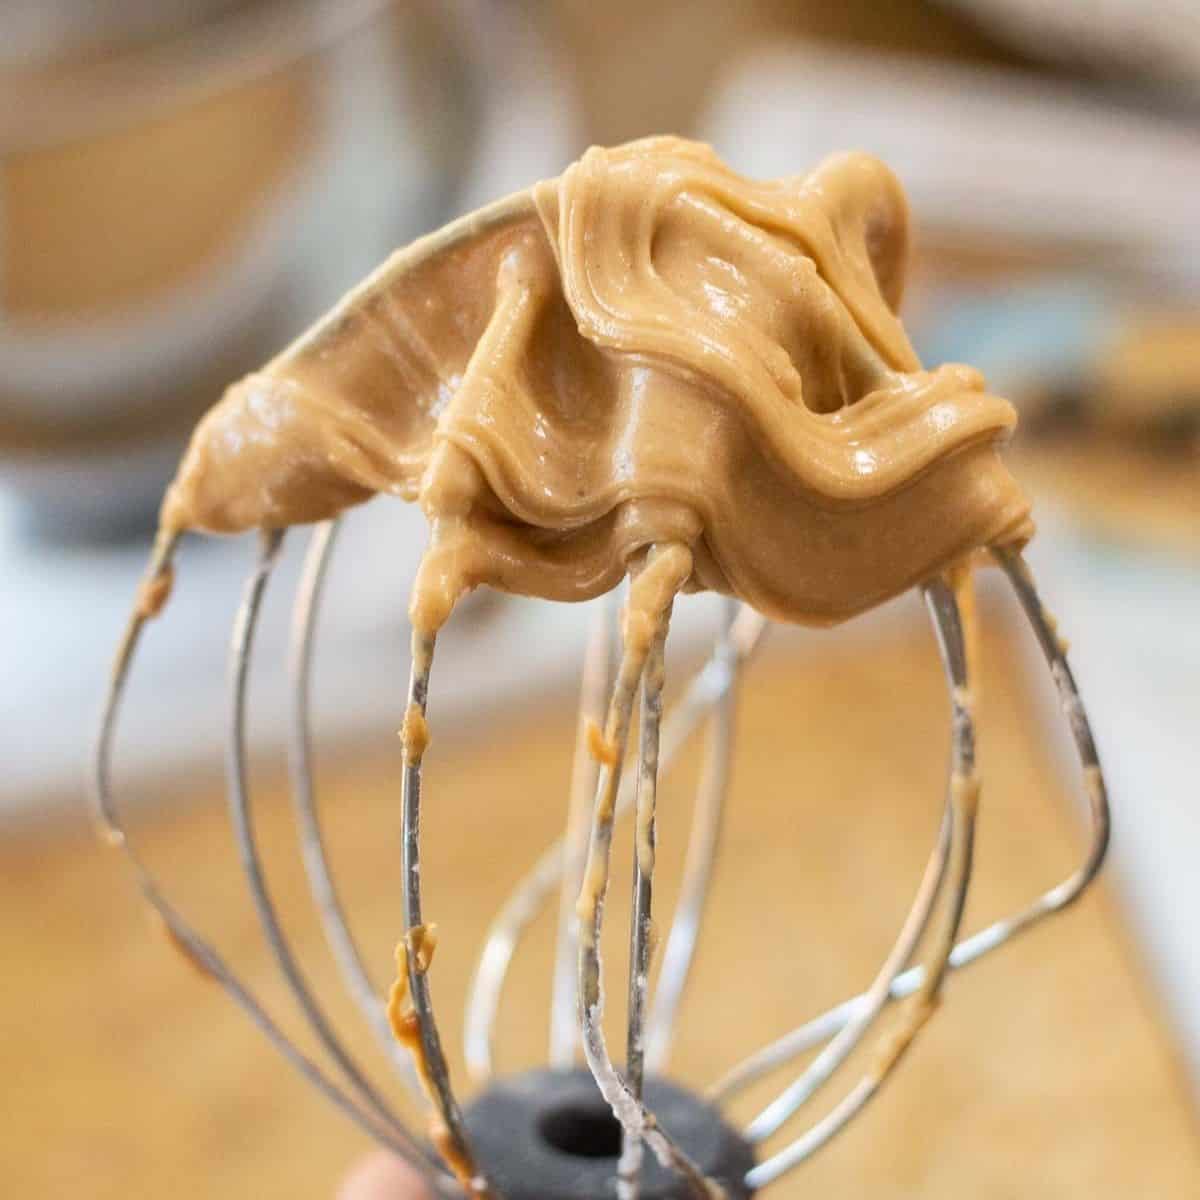 https://www.thisvivaciouslife.com/wp-content/uploads/2022/06/Peanut-Butter-Frosting-square.jpg